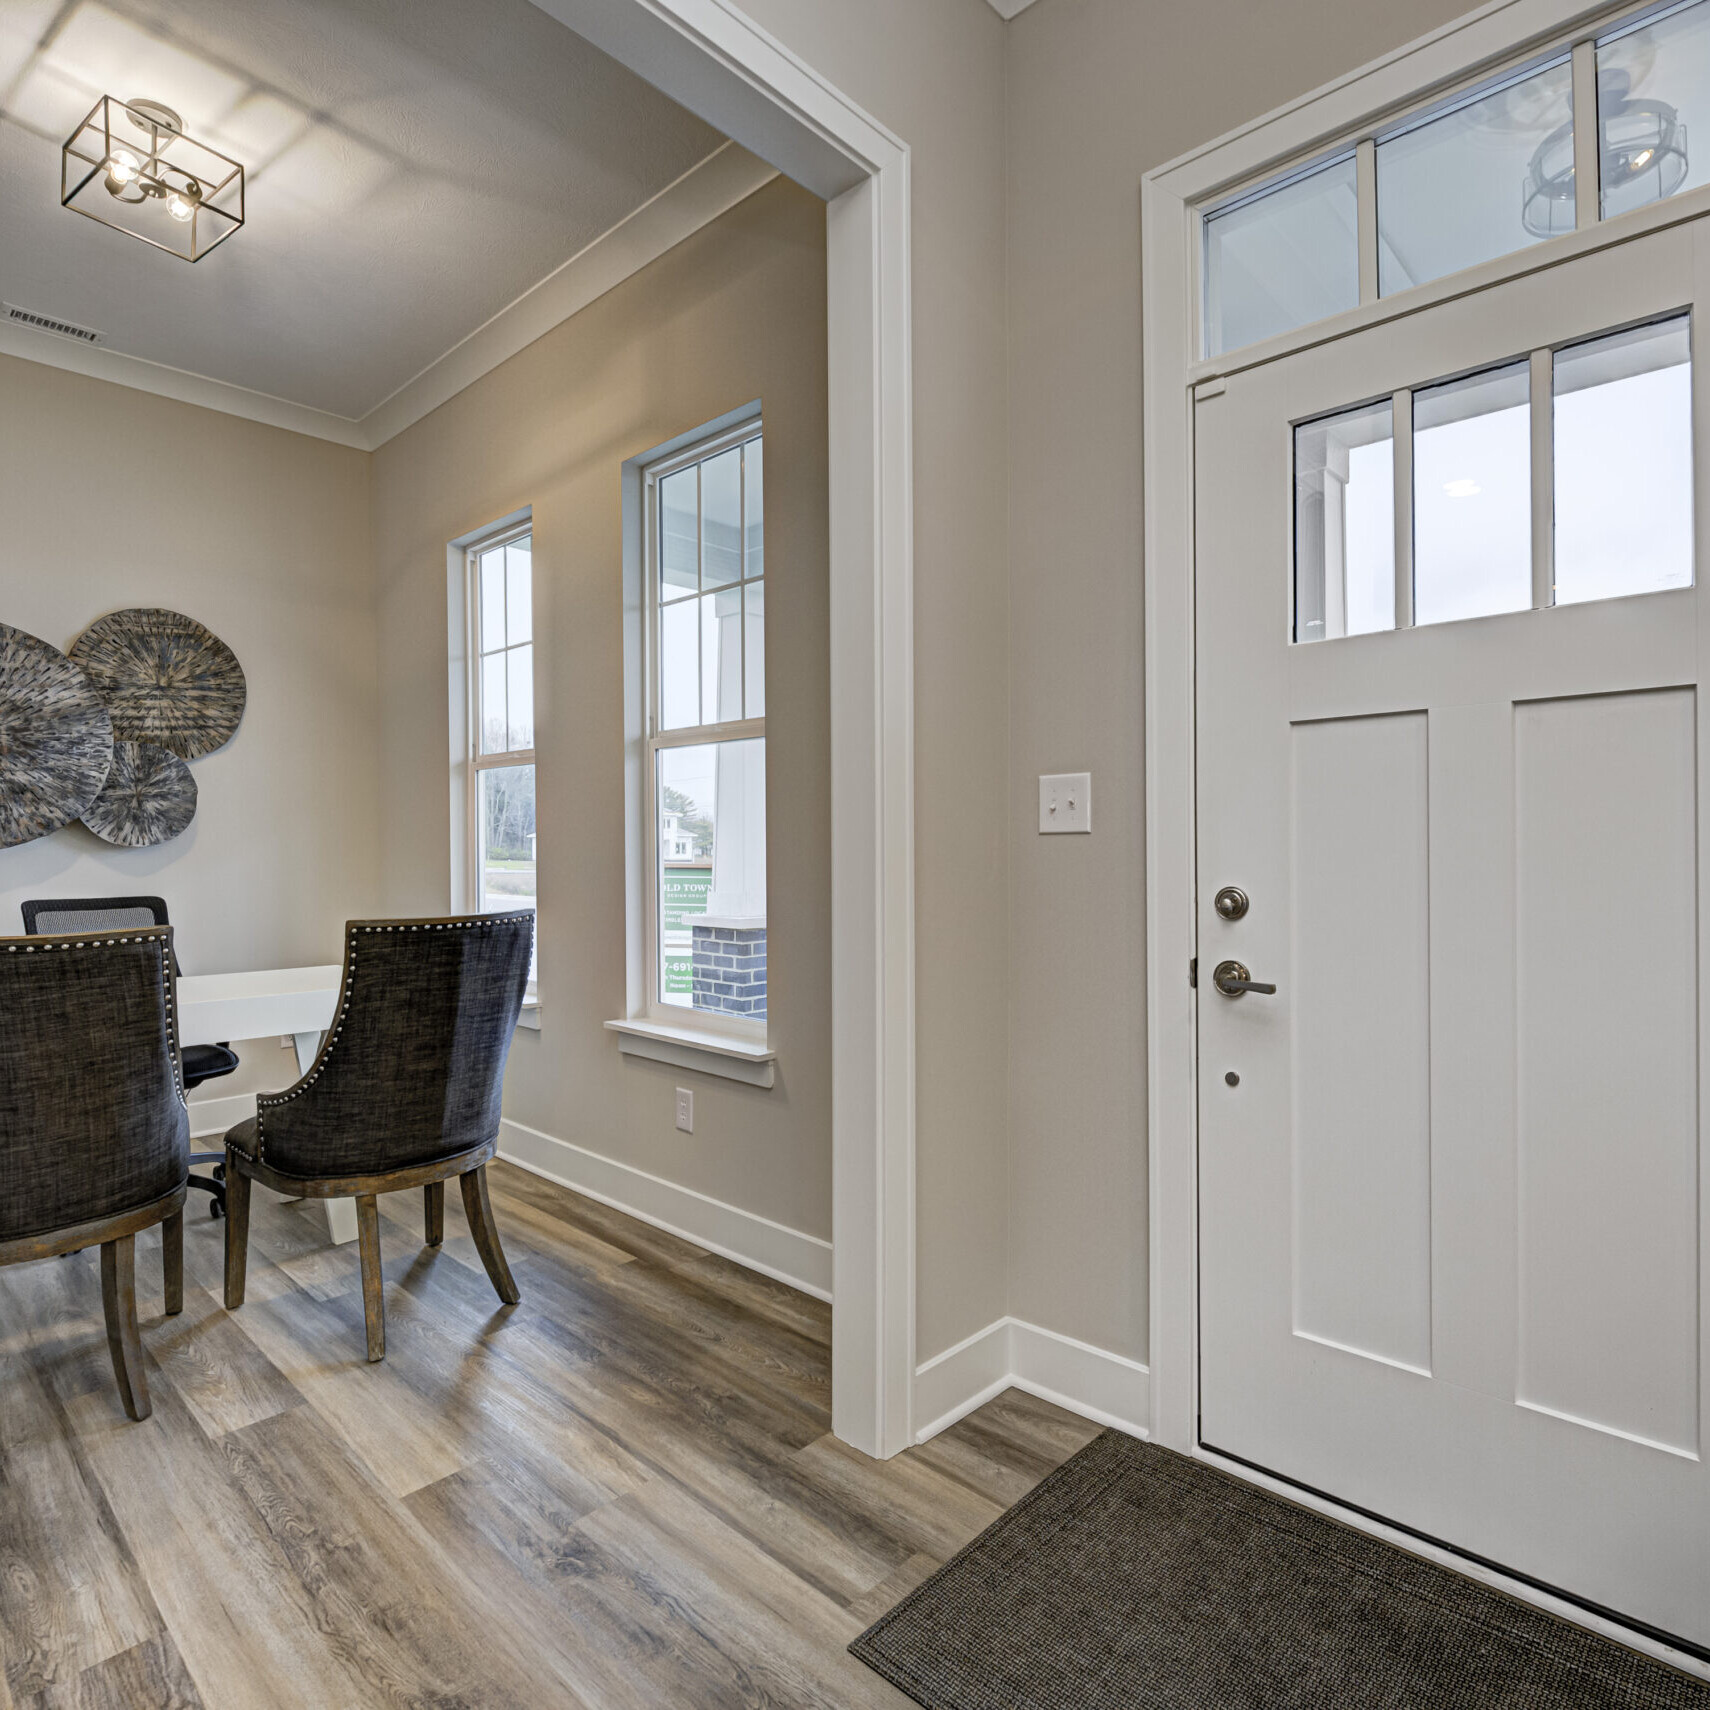 A dining room with hardwood floors and a white door, located in a custom home in Westfield, Indiana.